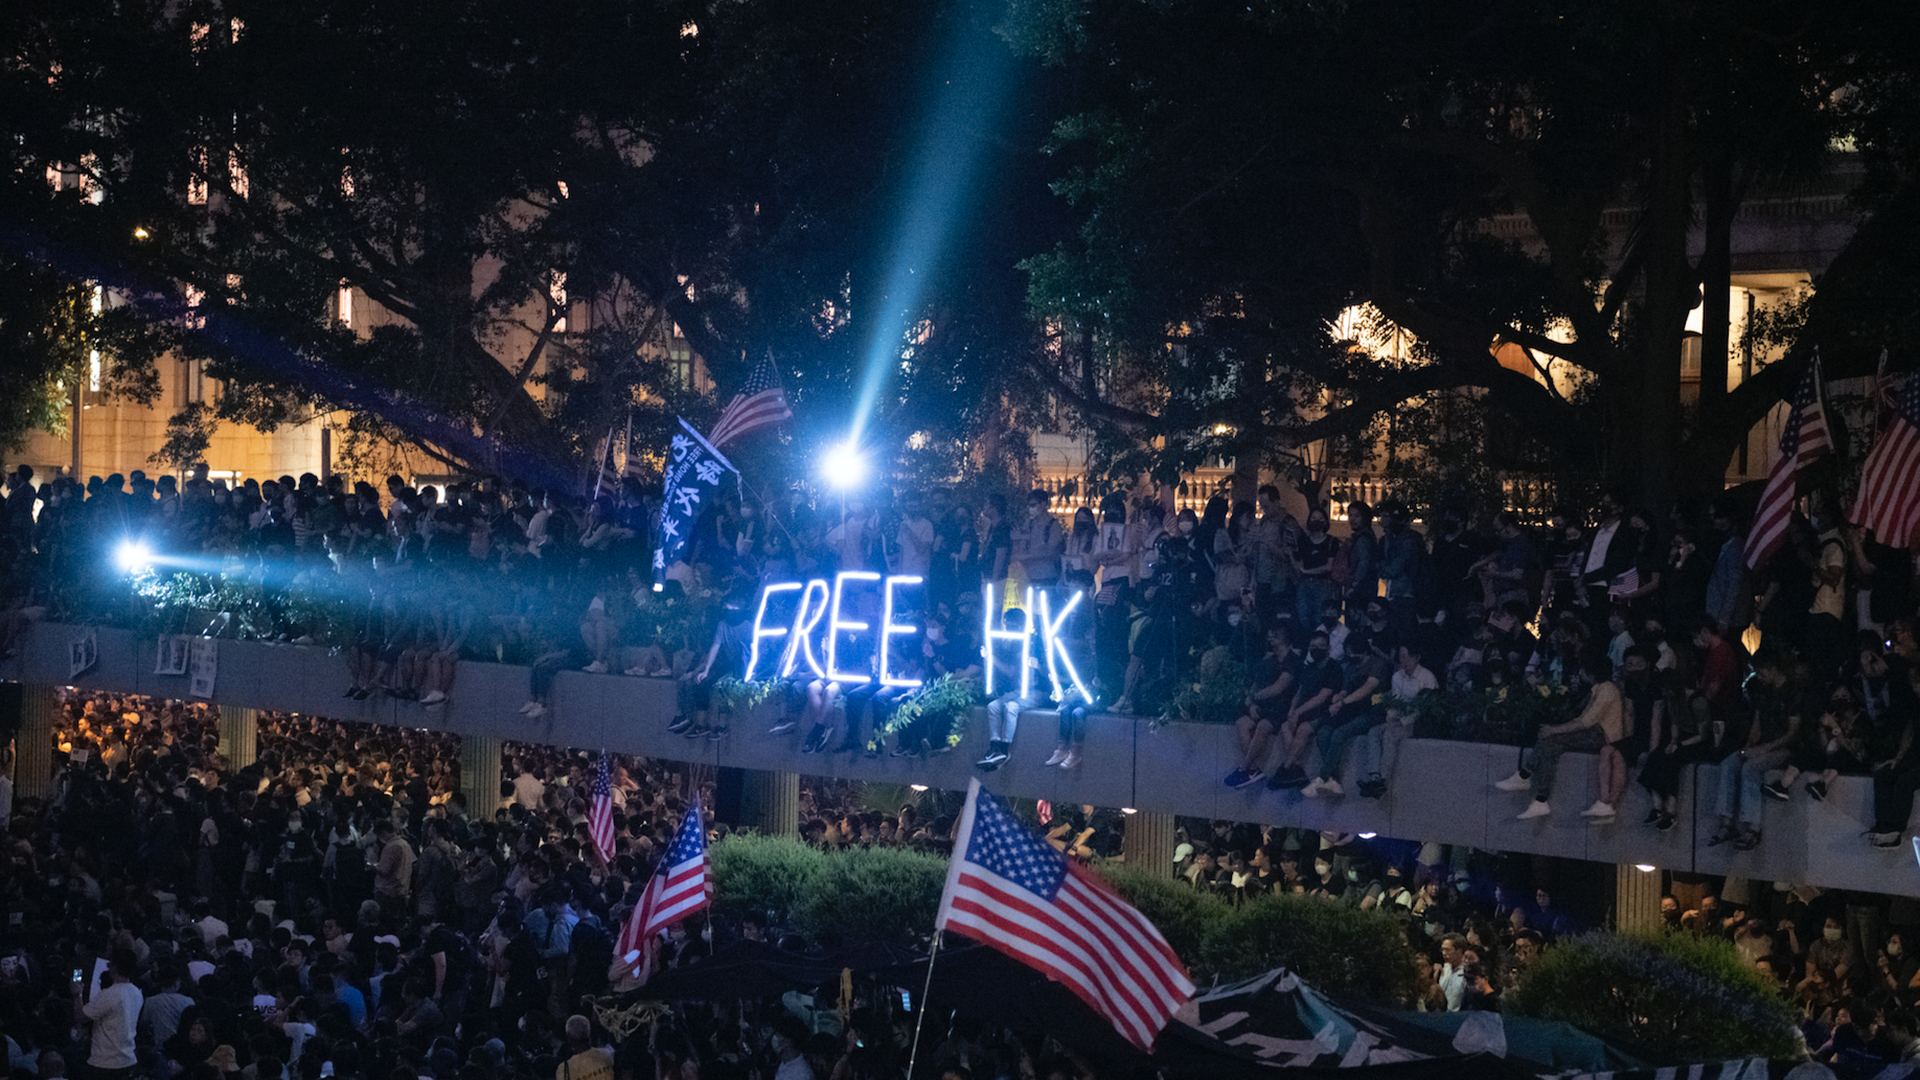 Protesters are seen holding up American Flags and a Free HK sign during a Rally in Hong Kong